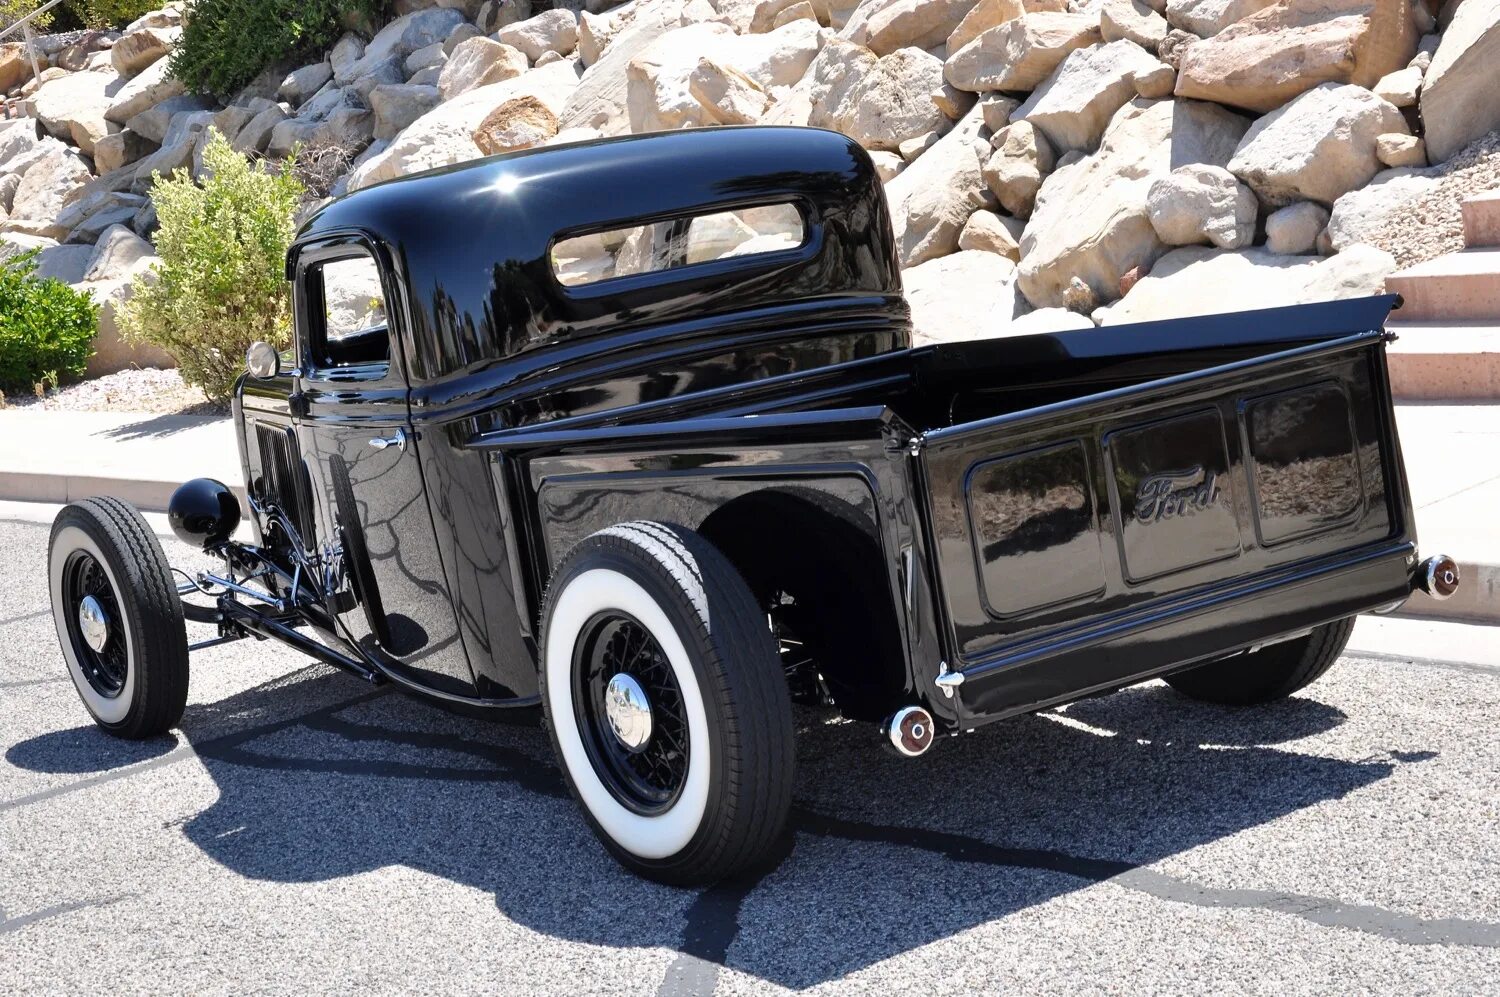 Hot pick up. Форд пикап 1936. Ford Truck 1936. Ford 32 Pickup hot Rod. Ford Pickup 1940 Tuning.